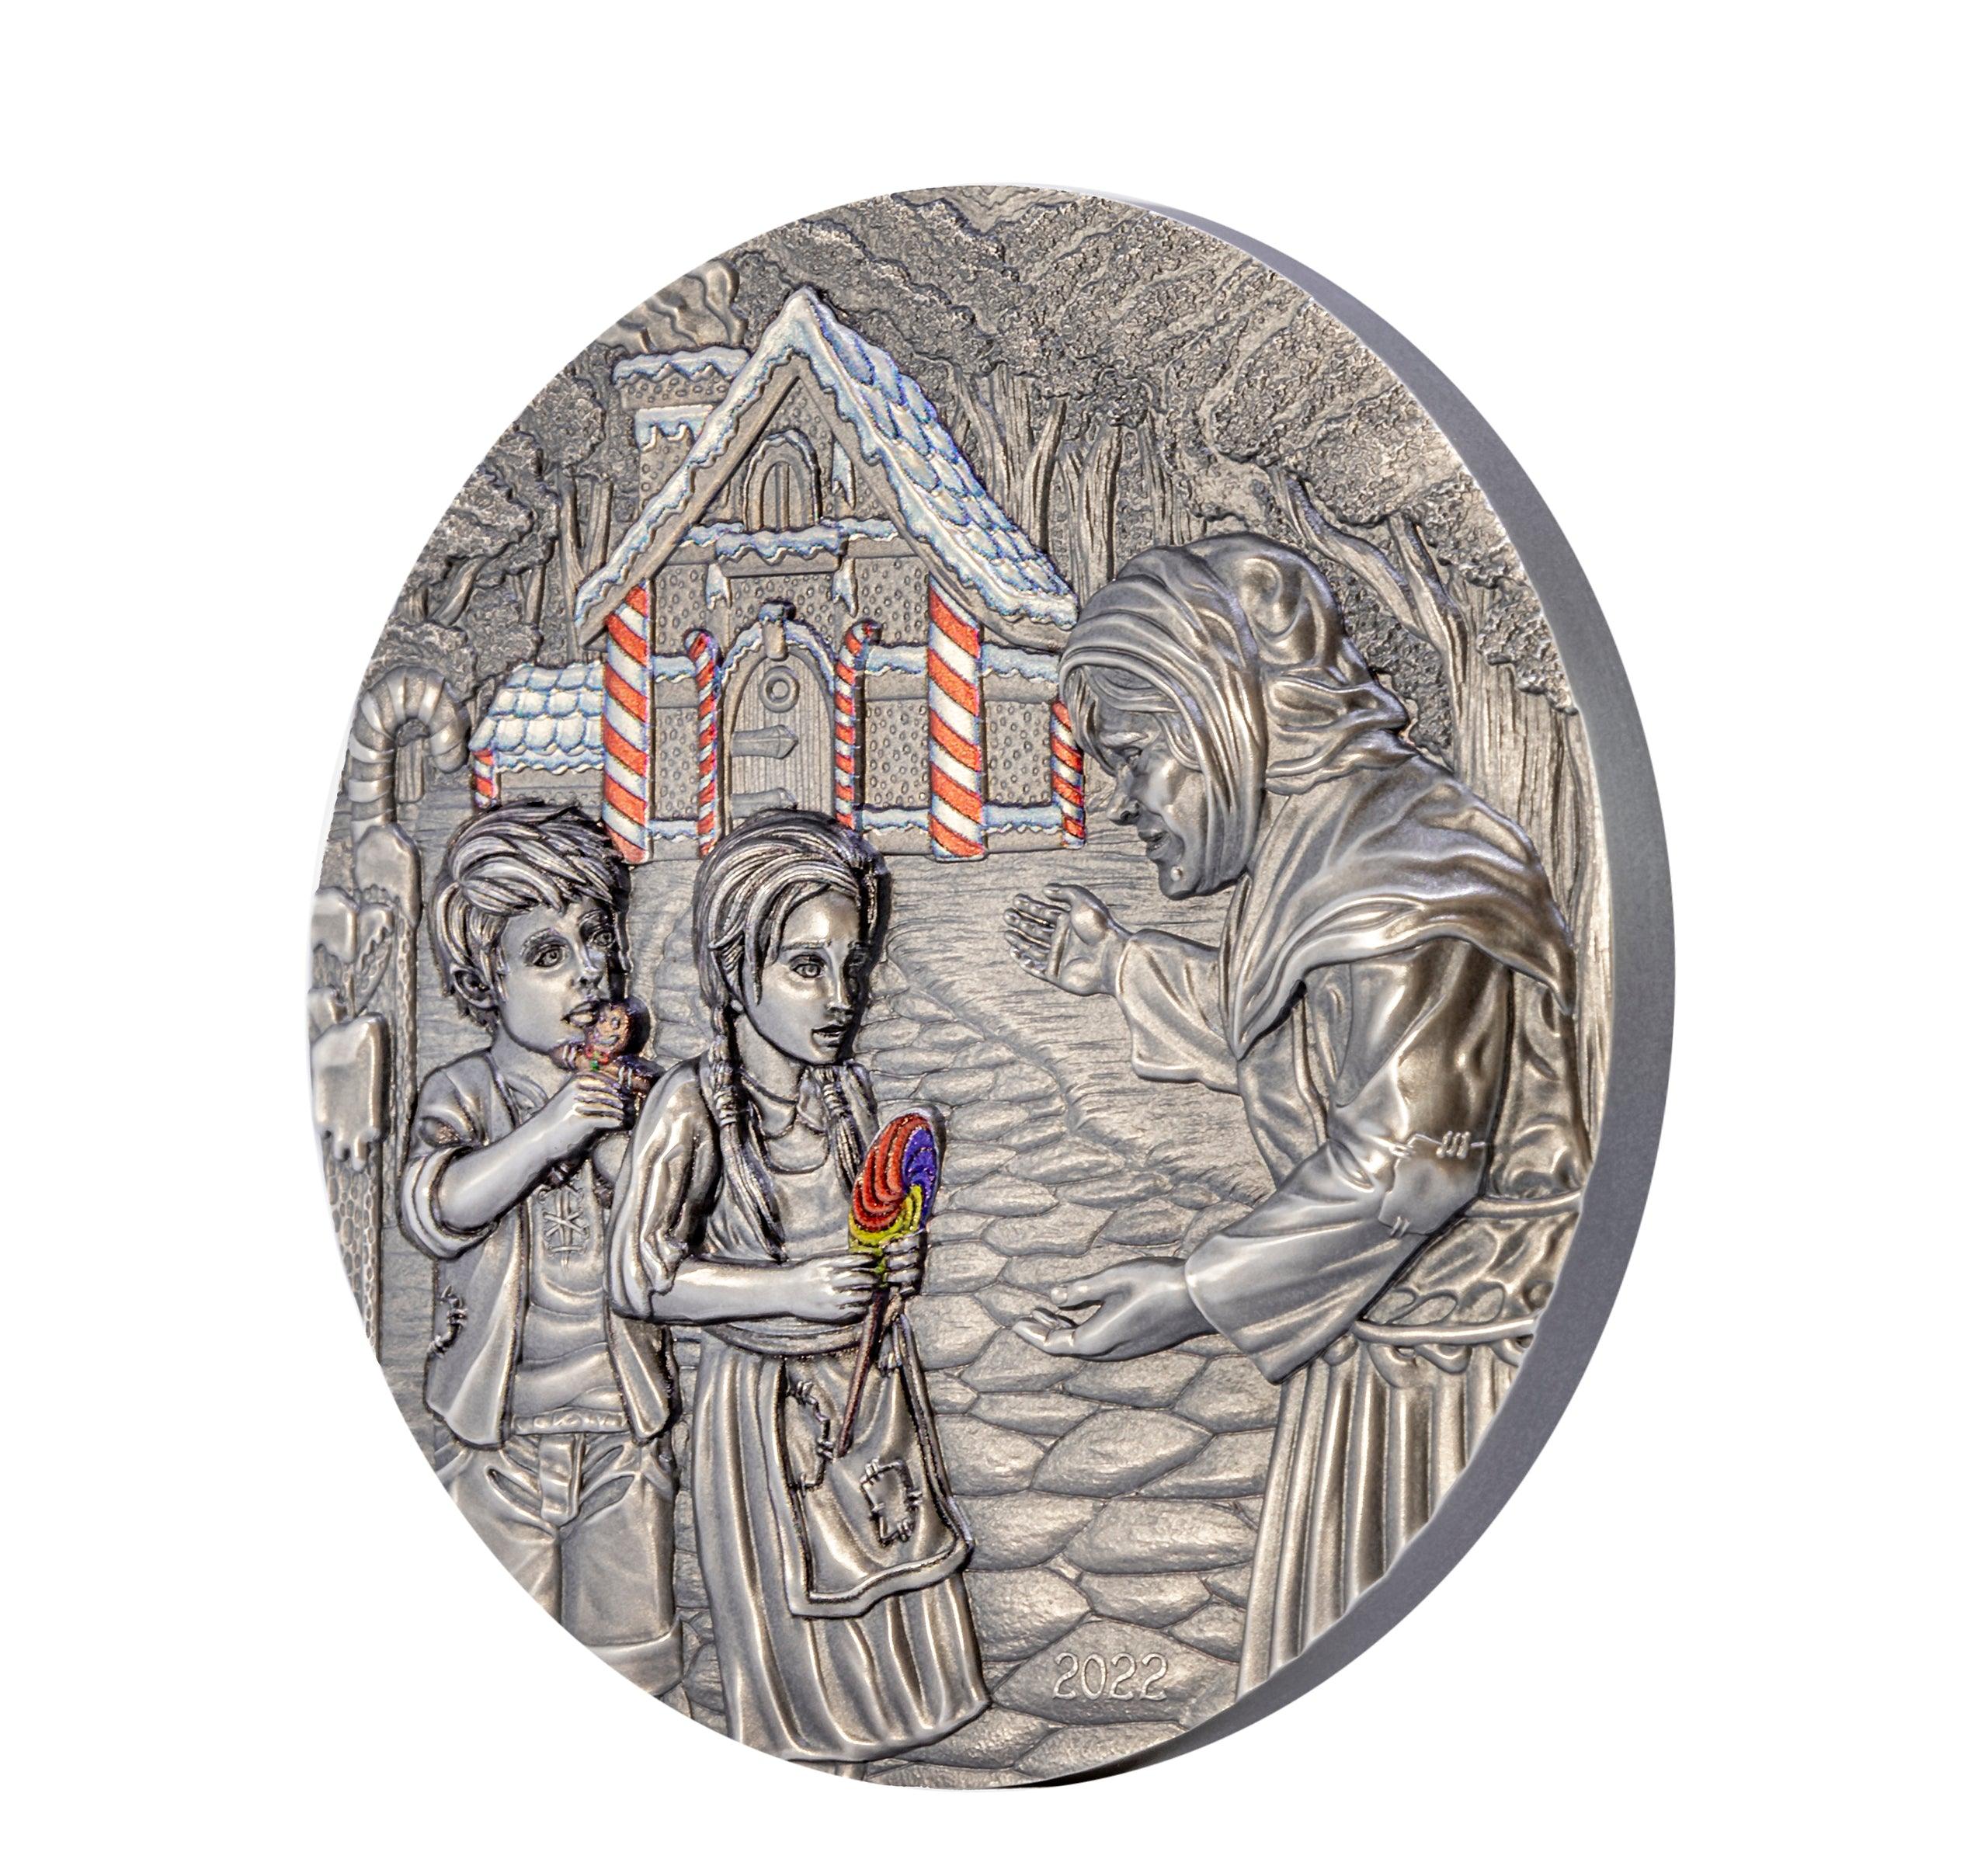 HANSEL AND GRETEL Fairy Tales Fables 3 Oz Silver Coin $20 Cook Islands 2022 - PARTHAVA COIN